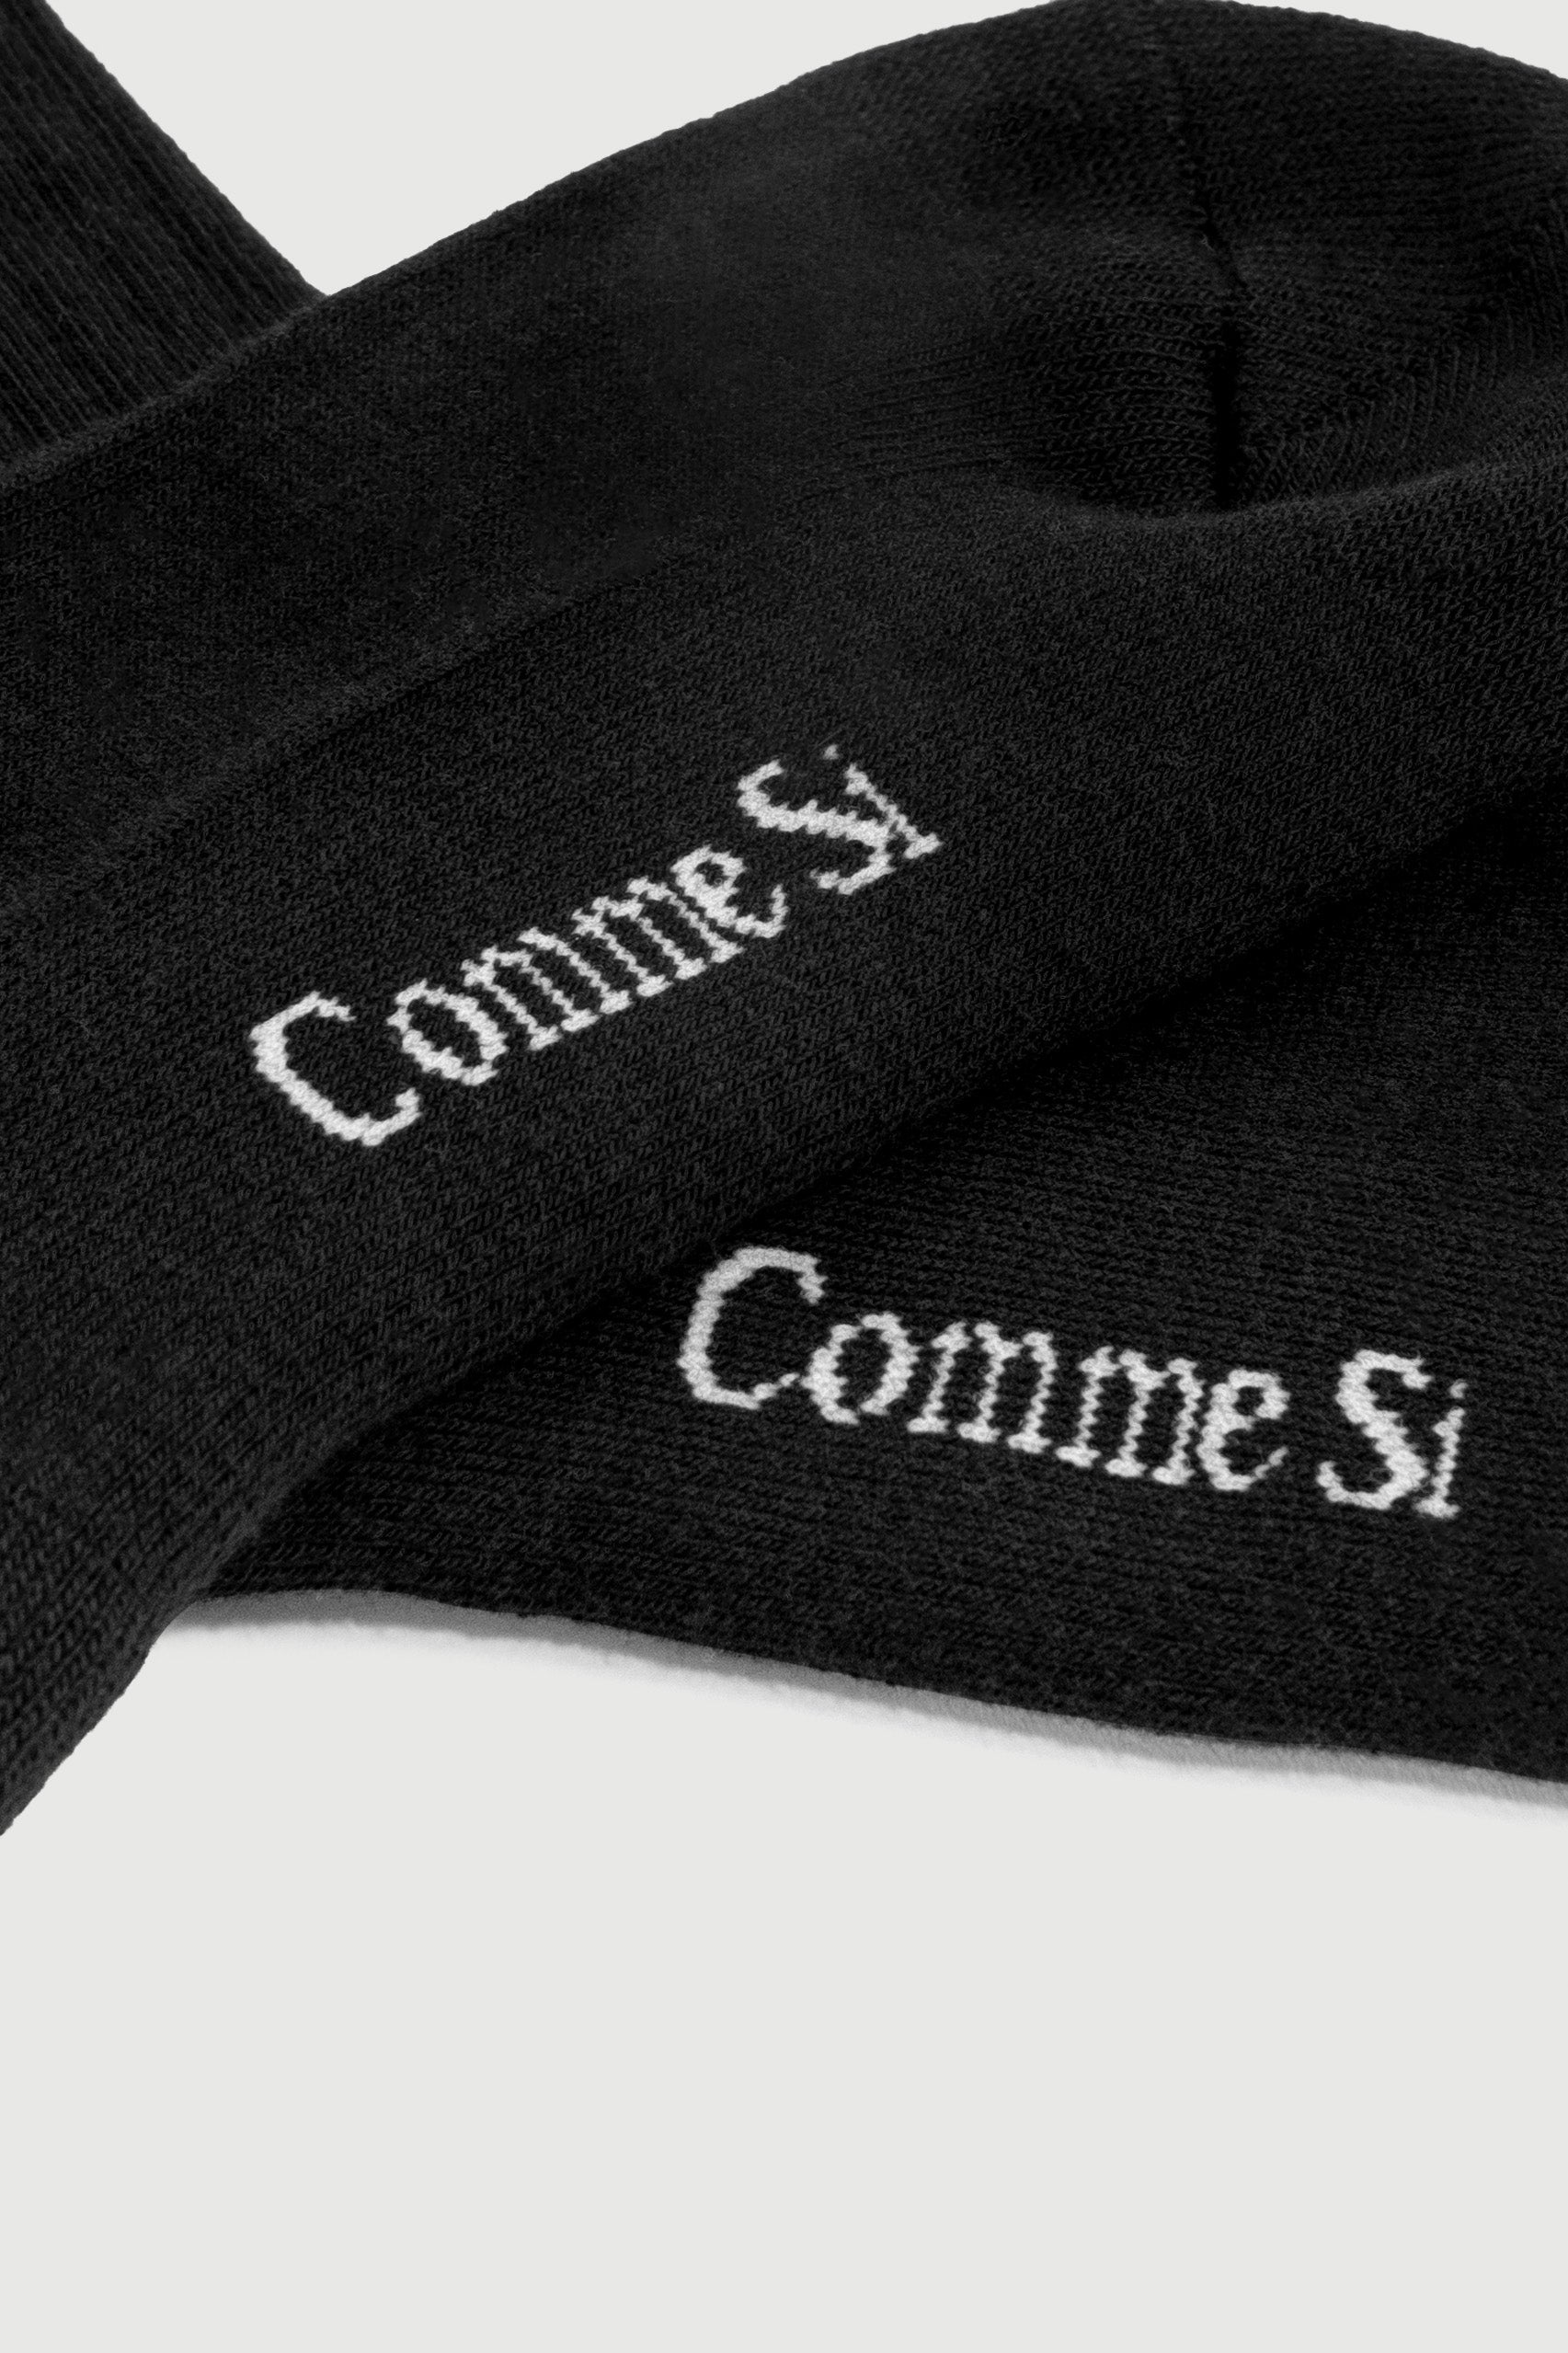 Footbed detail, The Everyday Sock in Black, made with Organic Egyptian Cotton, by Comme Si